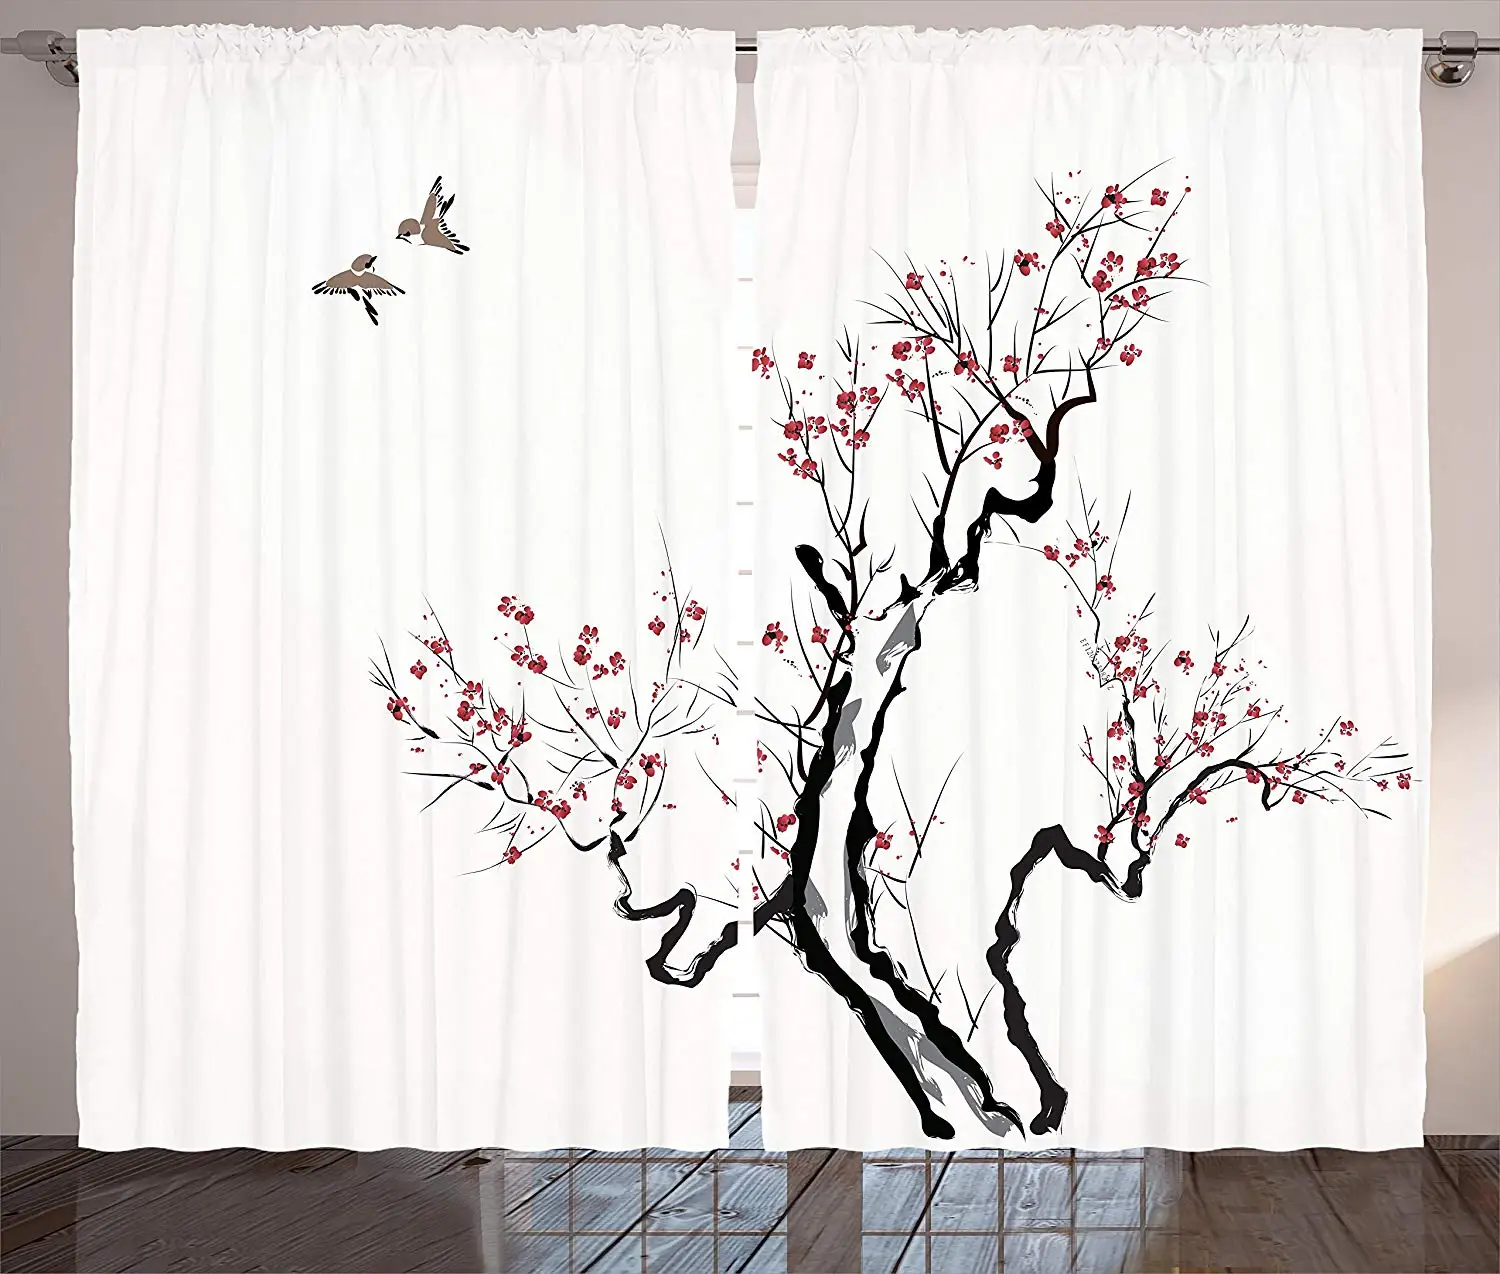 Japanese Curtains Classic Asian Painting Style Art of Flower Branches Blossom and Flying Birds Pattern Living Room Bedroom